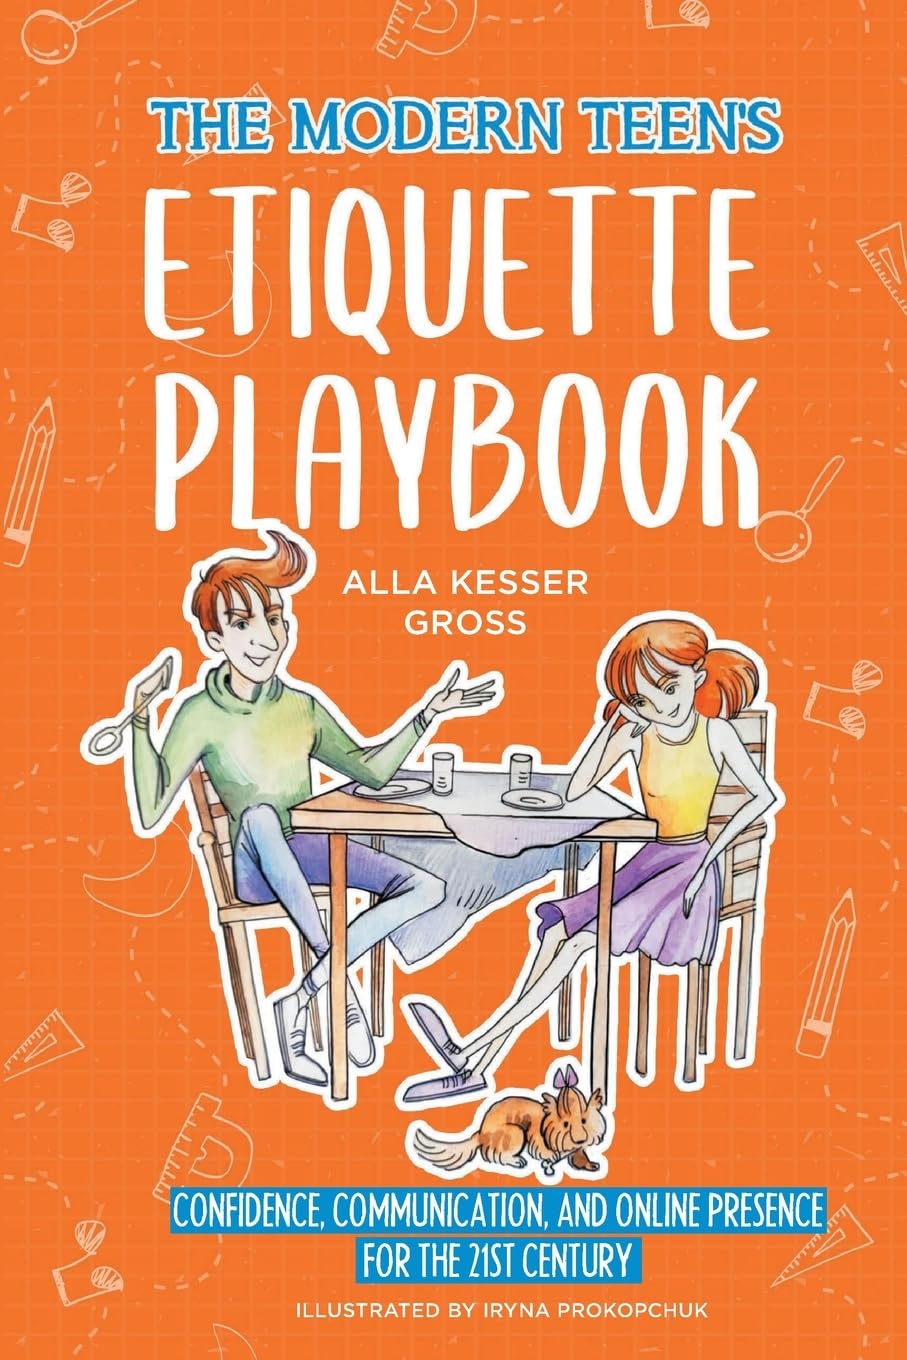 The Modern Teen's Etiquette Playbook: Confidence, Communication, and Online Presence for the 21st Century